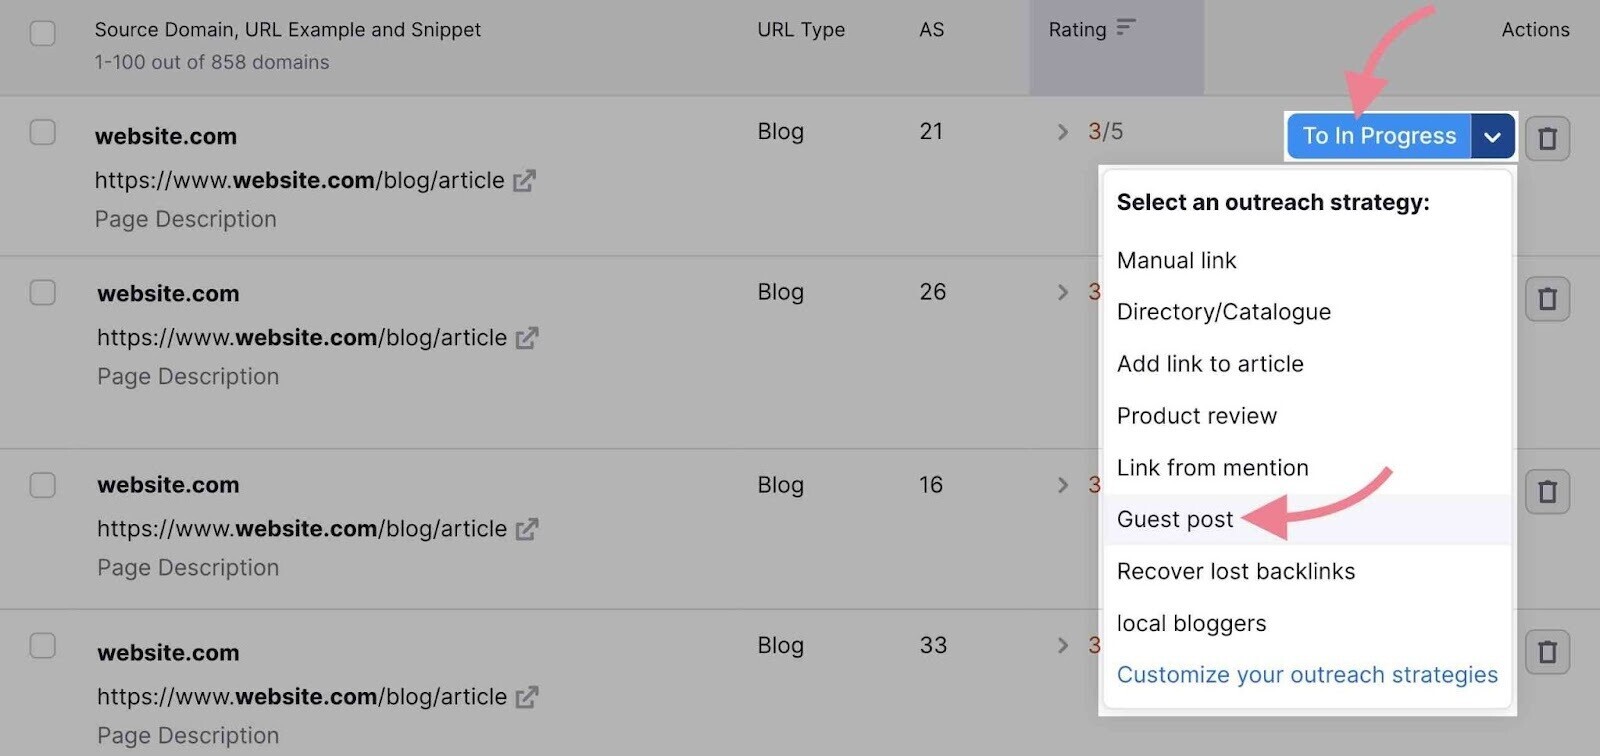 Select an outreach strategy section